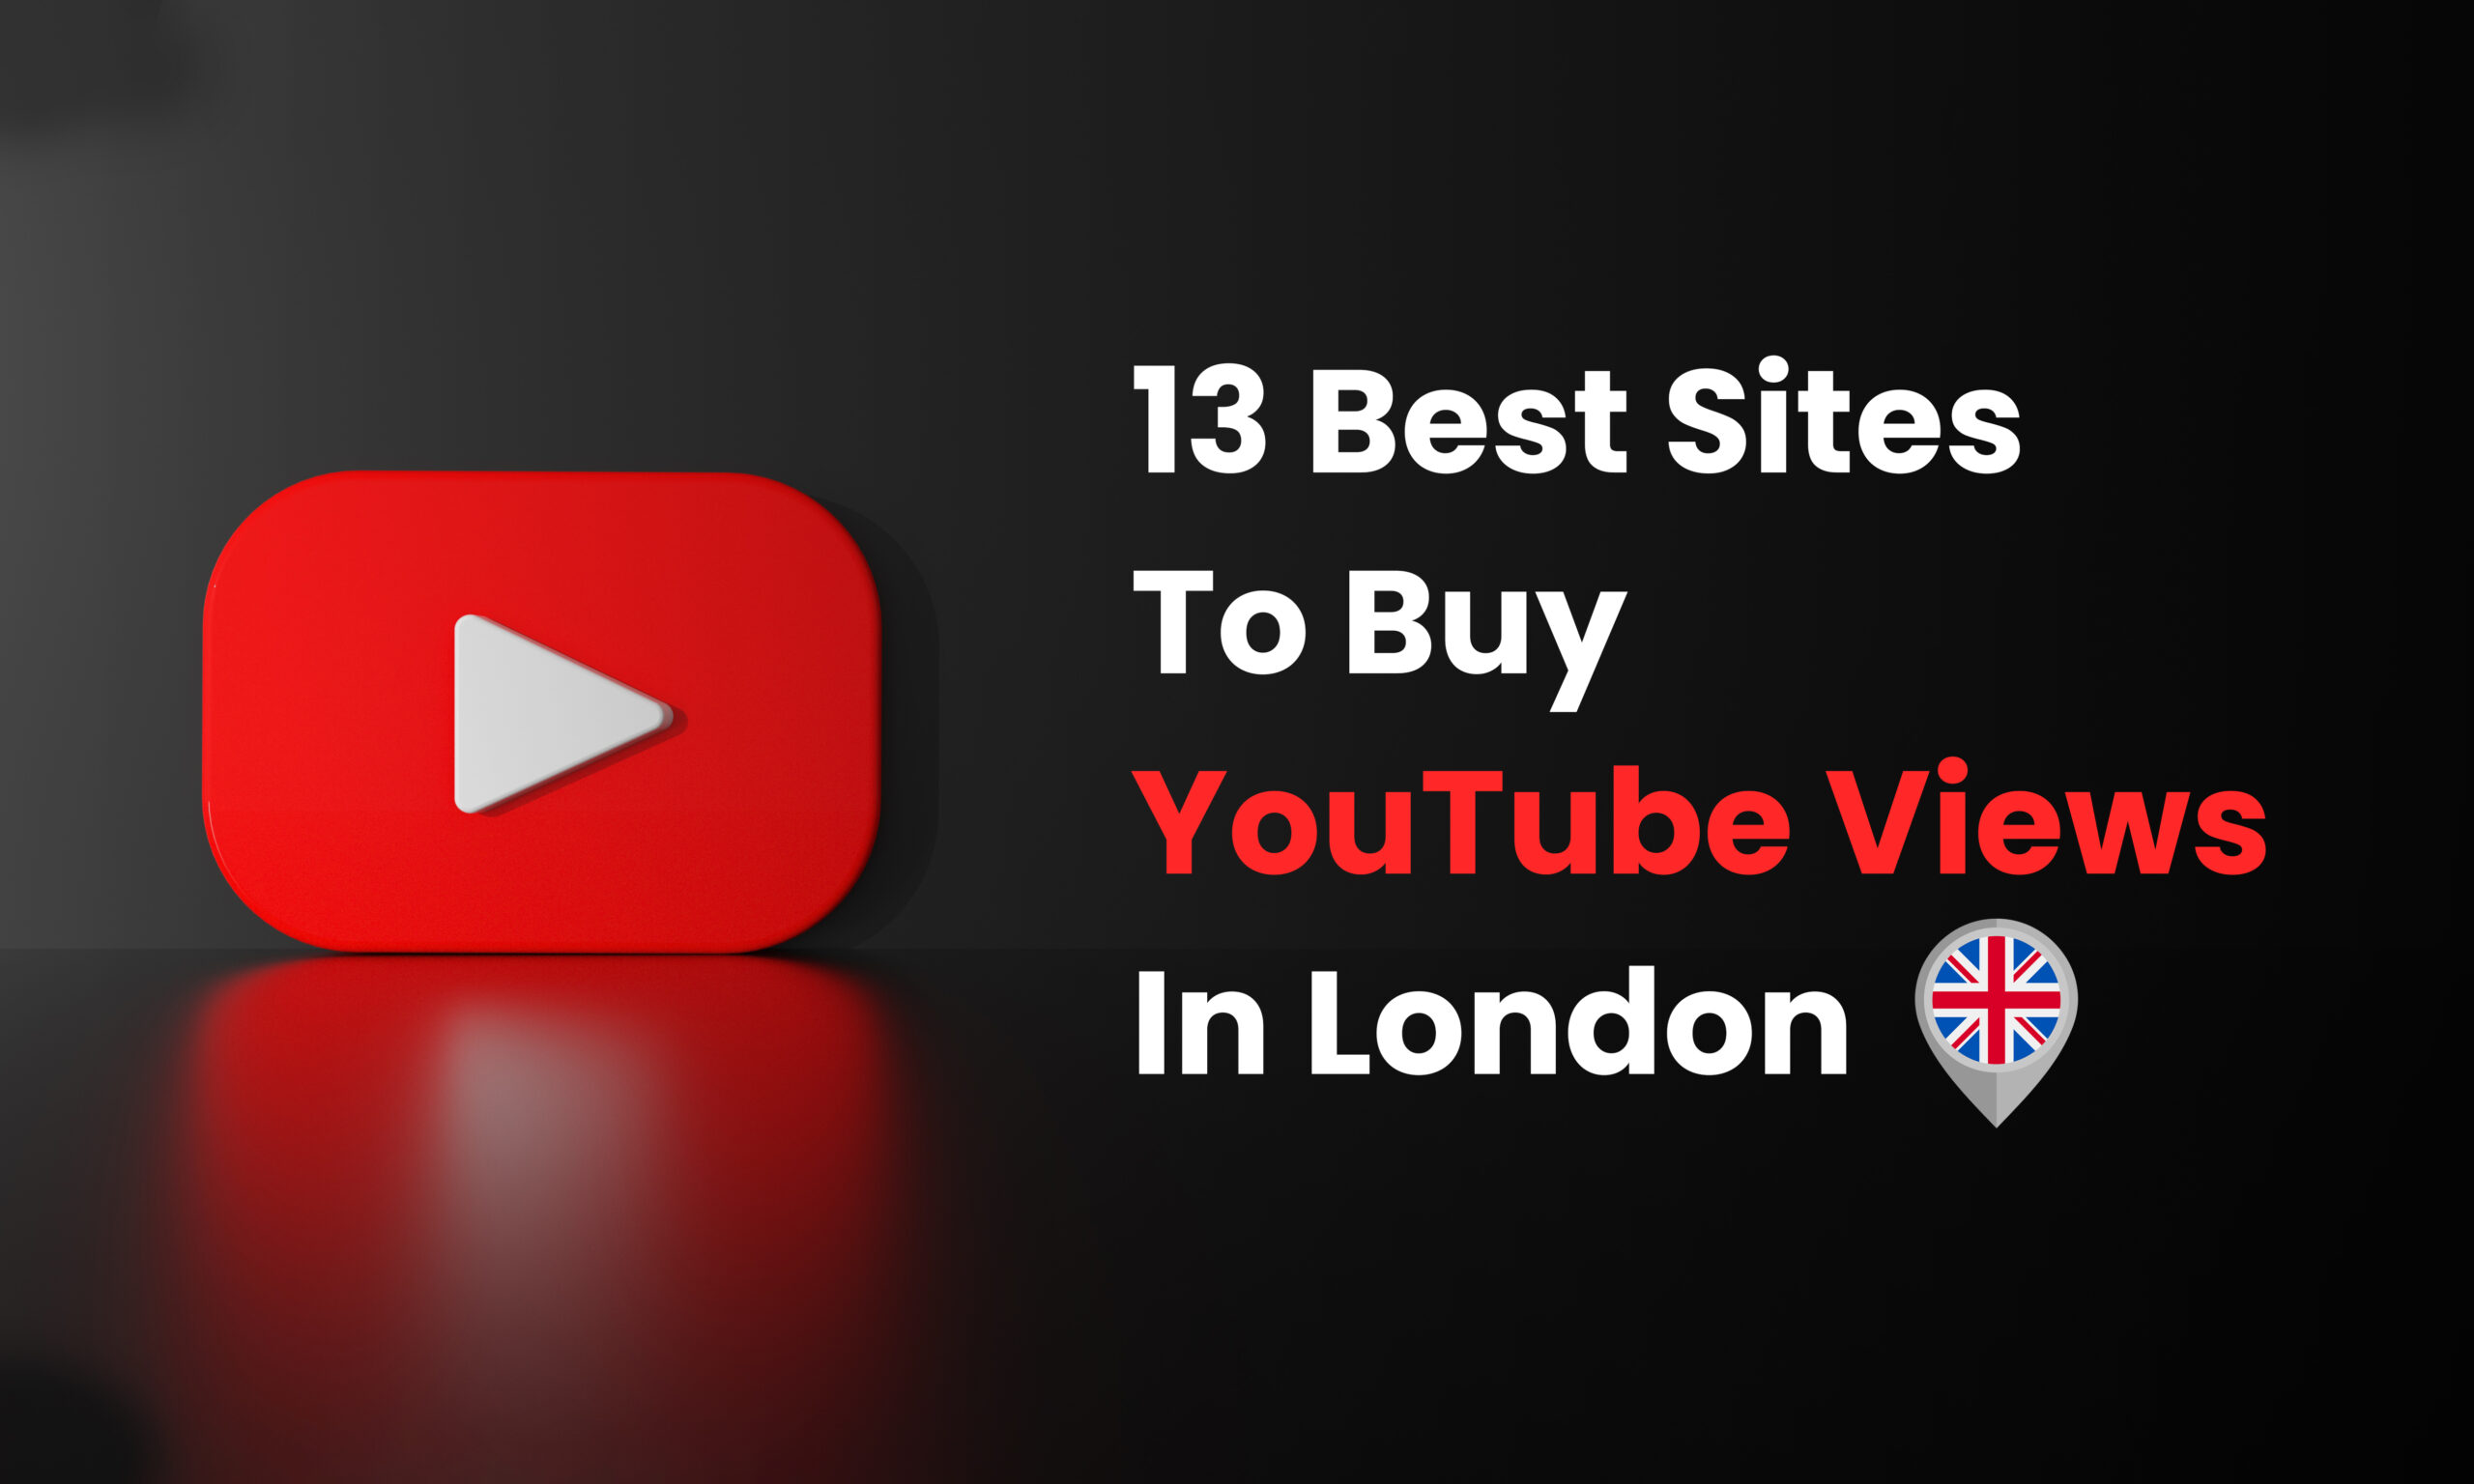 Best Sites To Buy YouTube Views In London